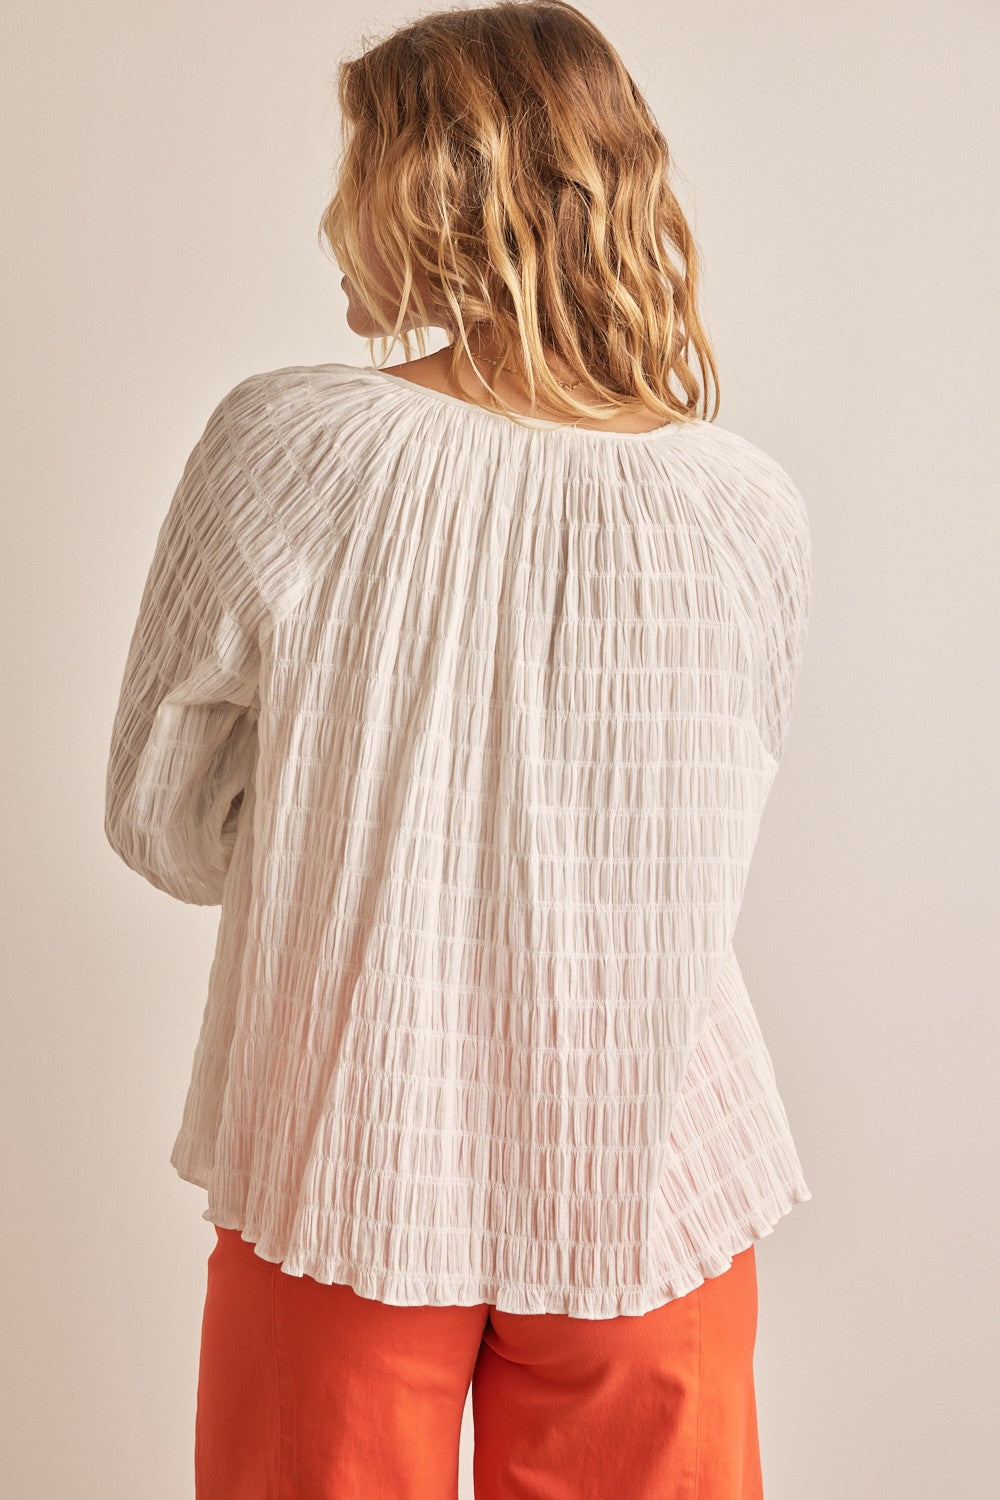 In February Textured Tie Neck Blouse Trendsi